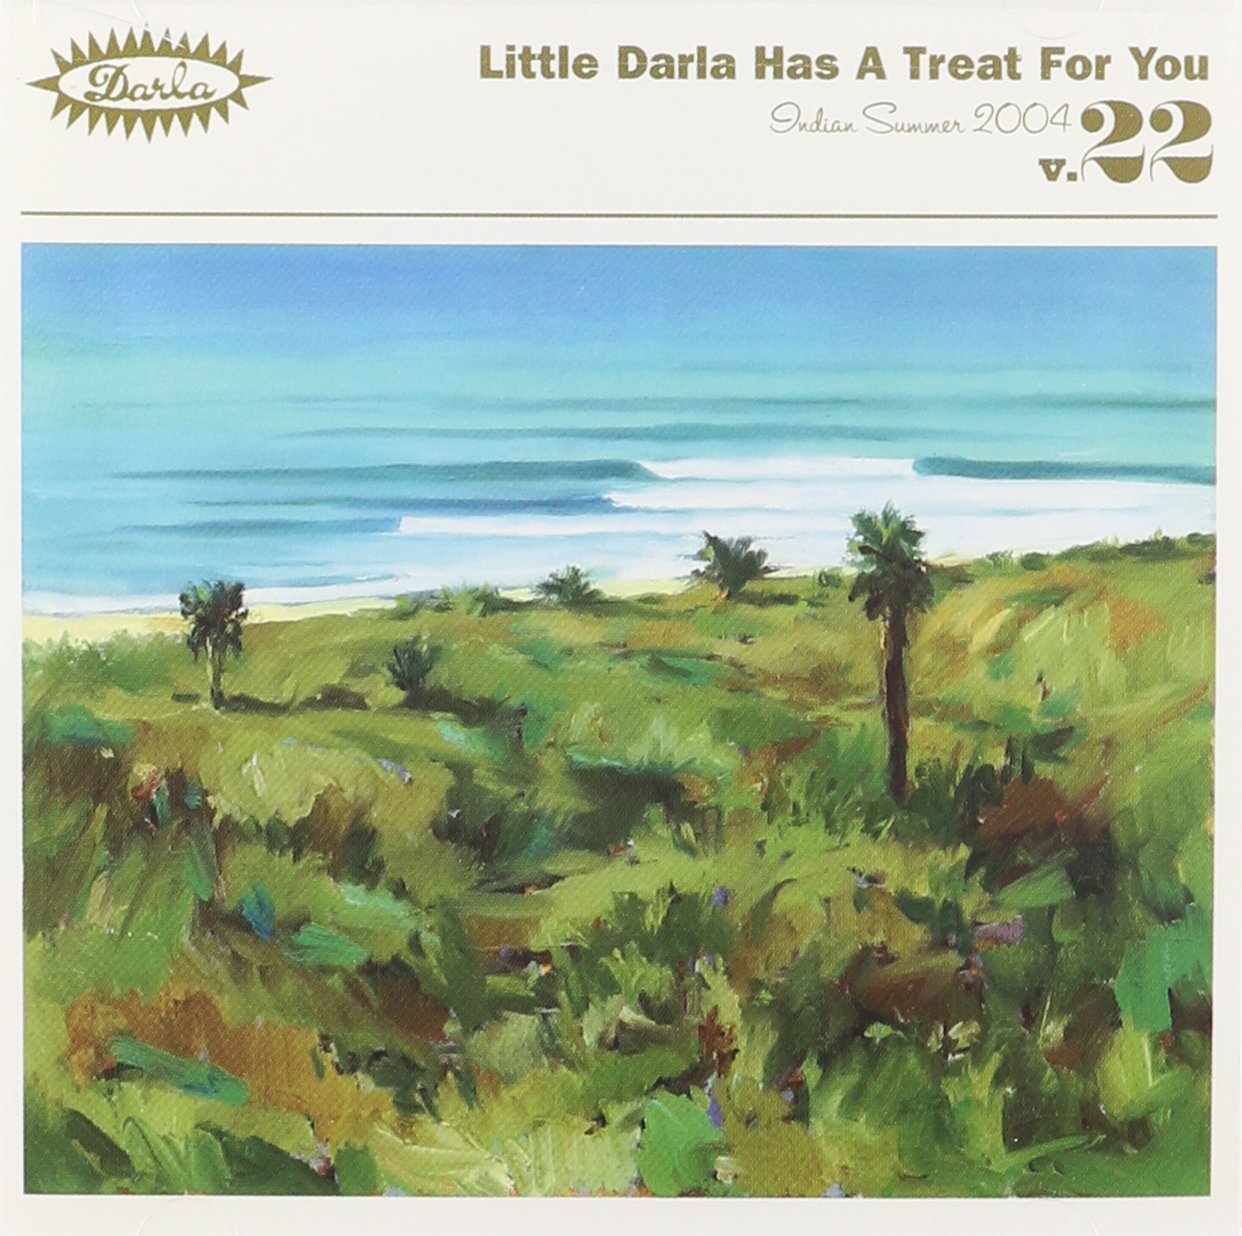 v/a - Little Darla has a Treat for You, Vol. 22, Indian Summer 2004